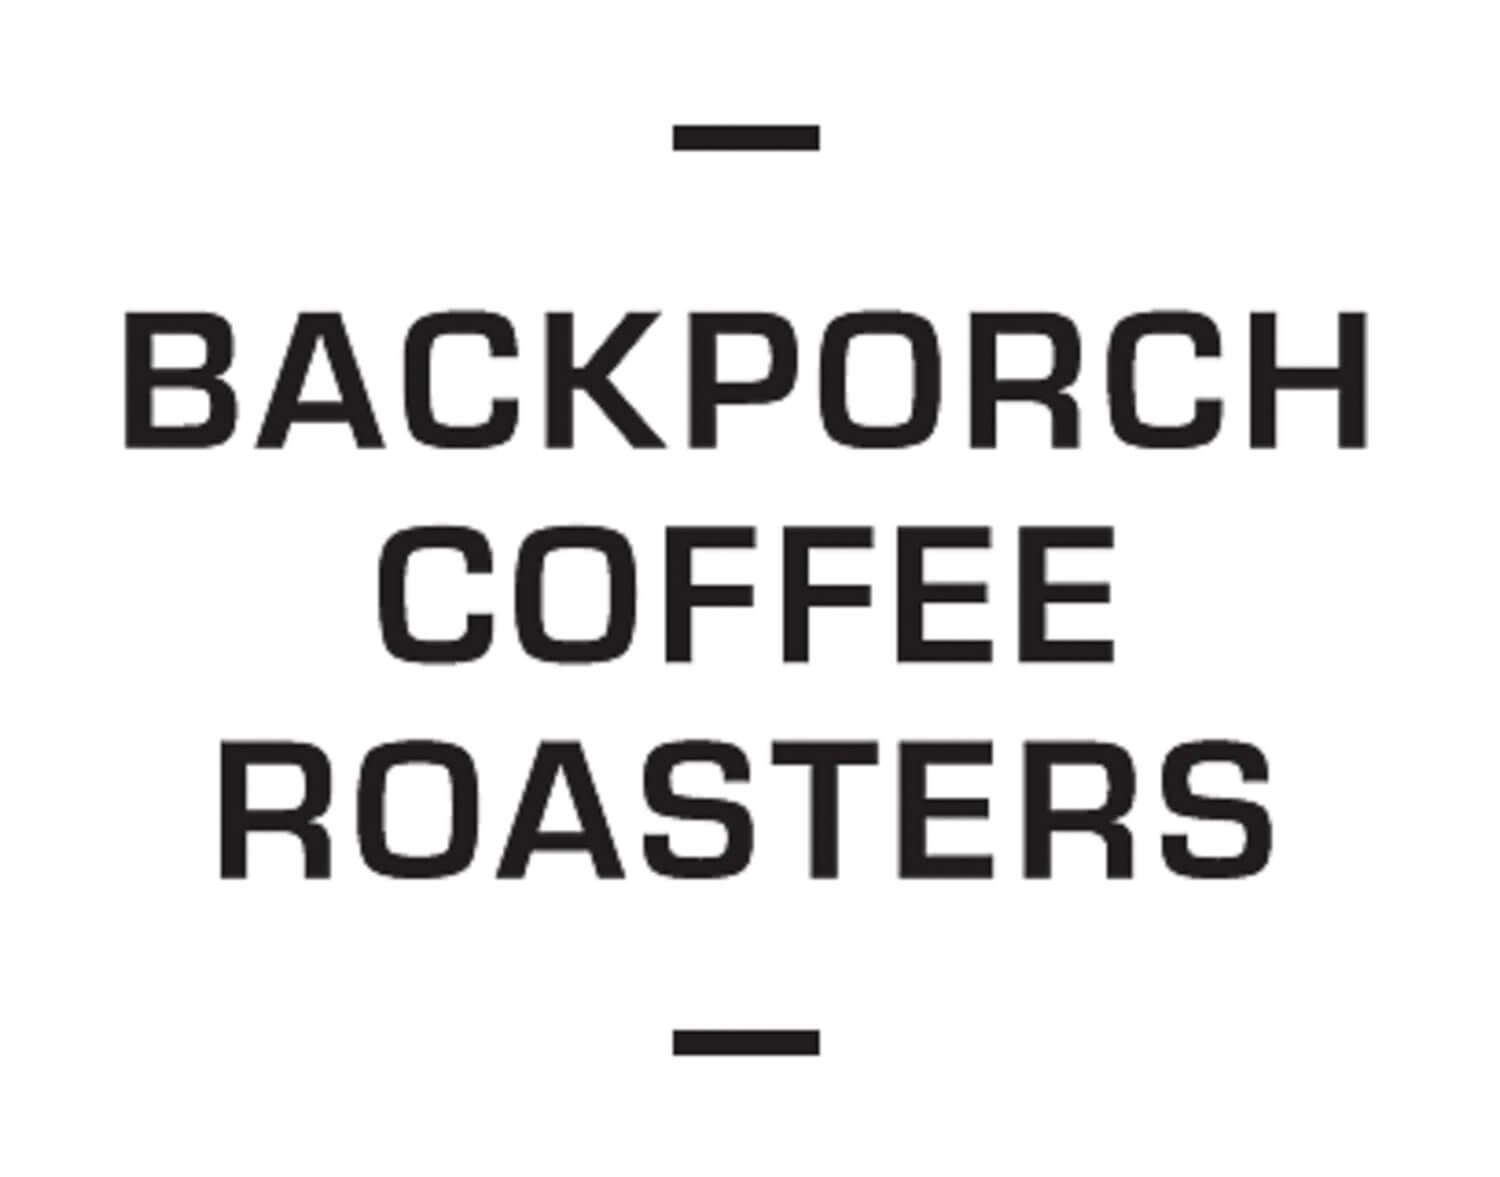 Backporch Coffee Roasters Bend Oregon Cafe.jpg